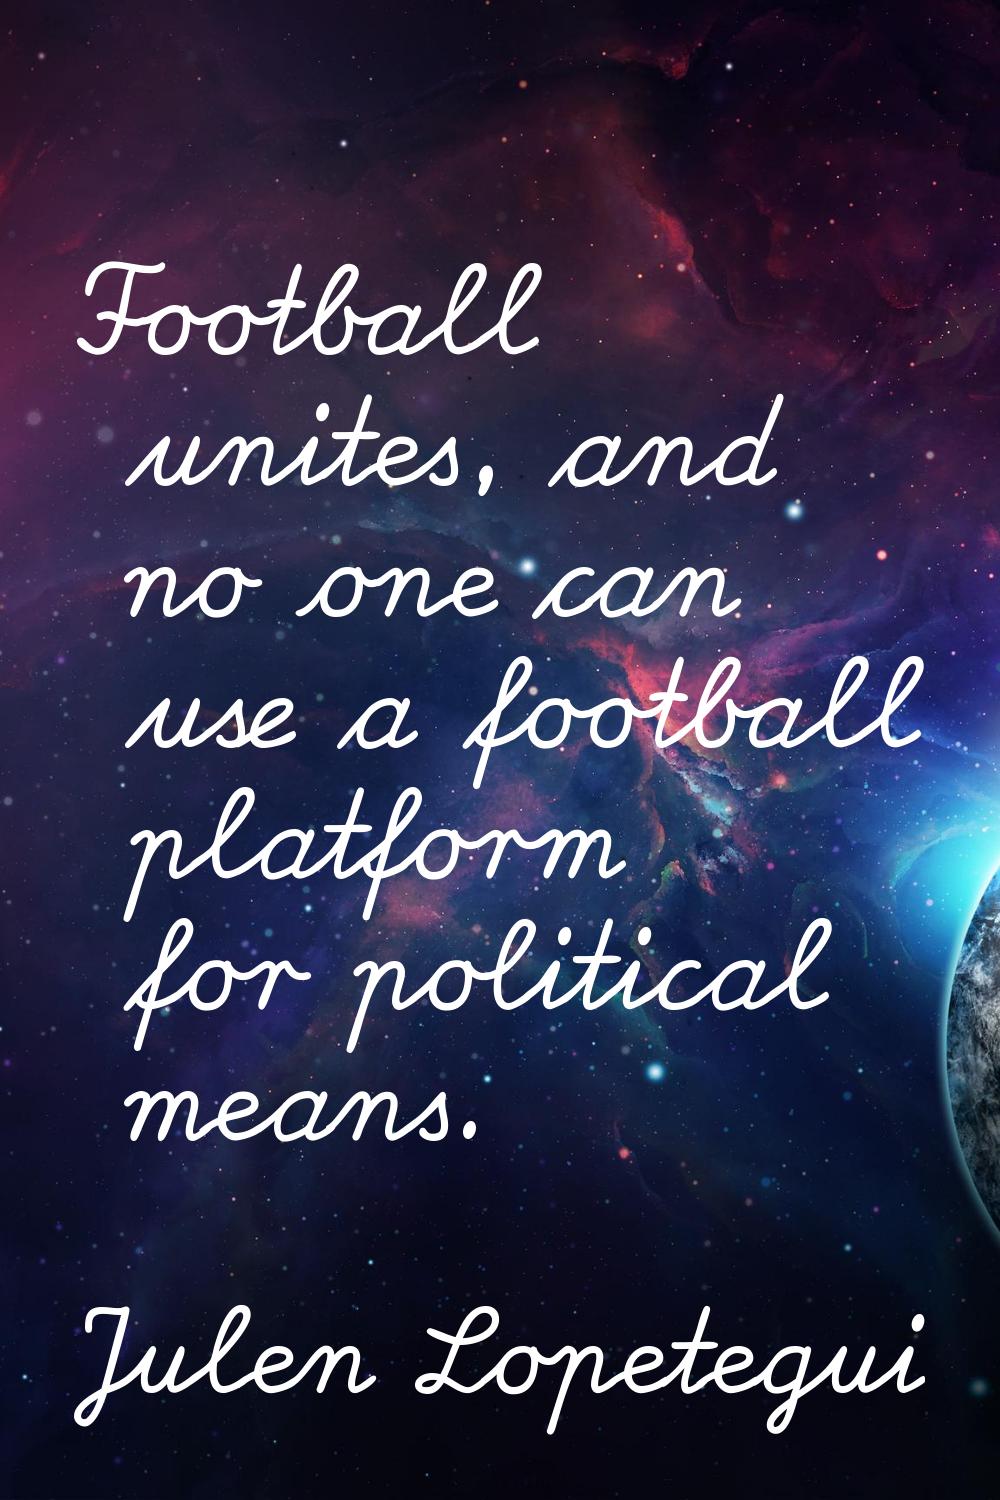 Football unites, and no one can use a football platform for political means.